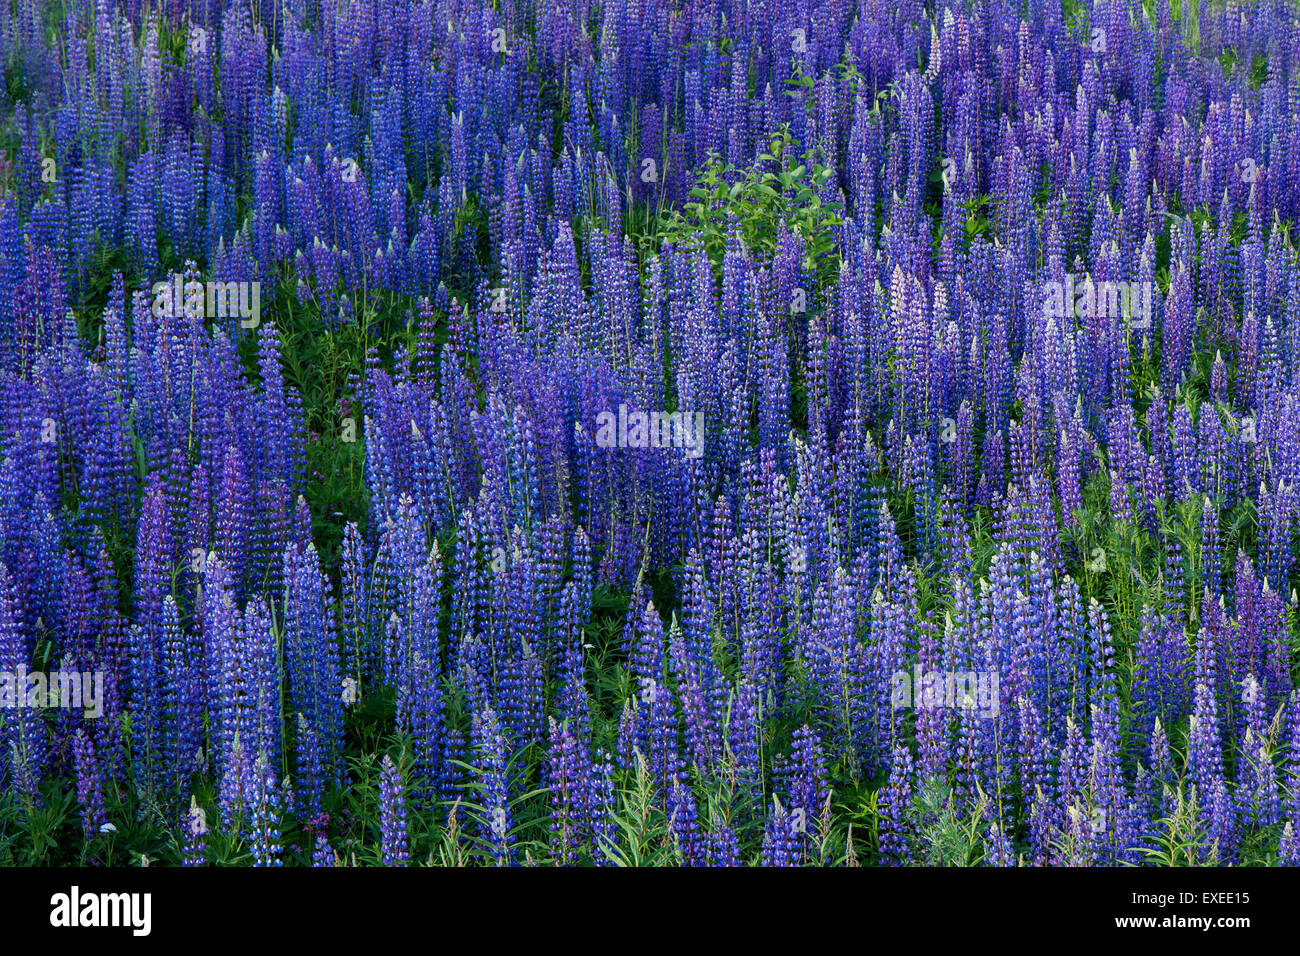 Field full of lupine flowers, viewed from above Stock Photo